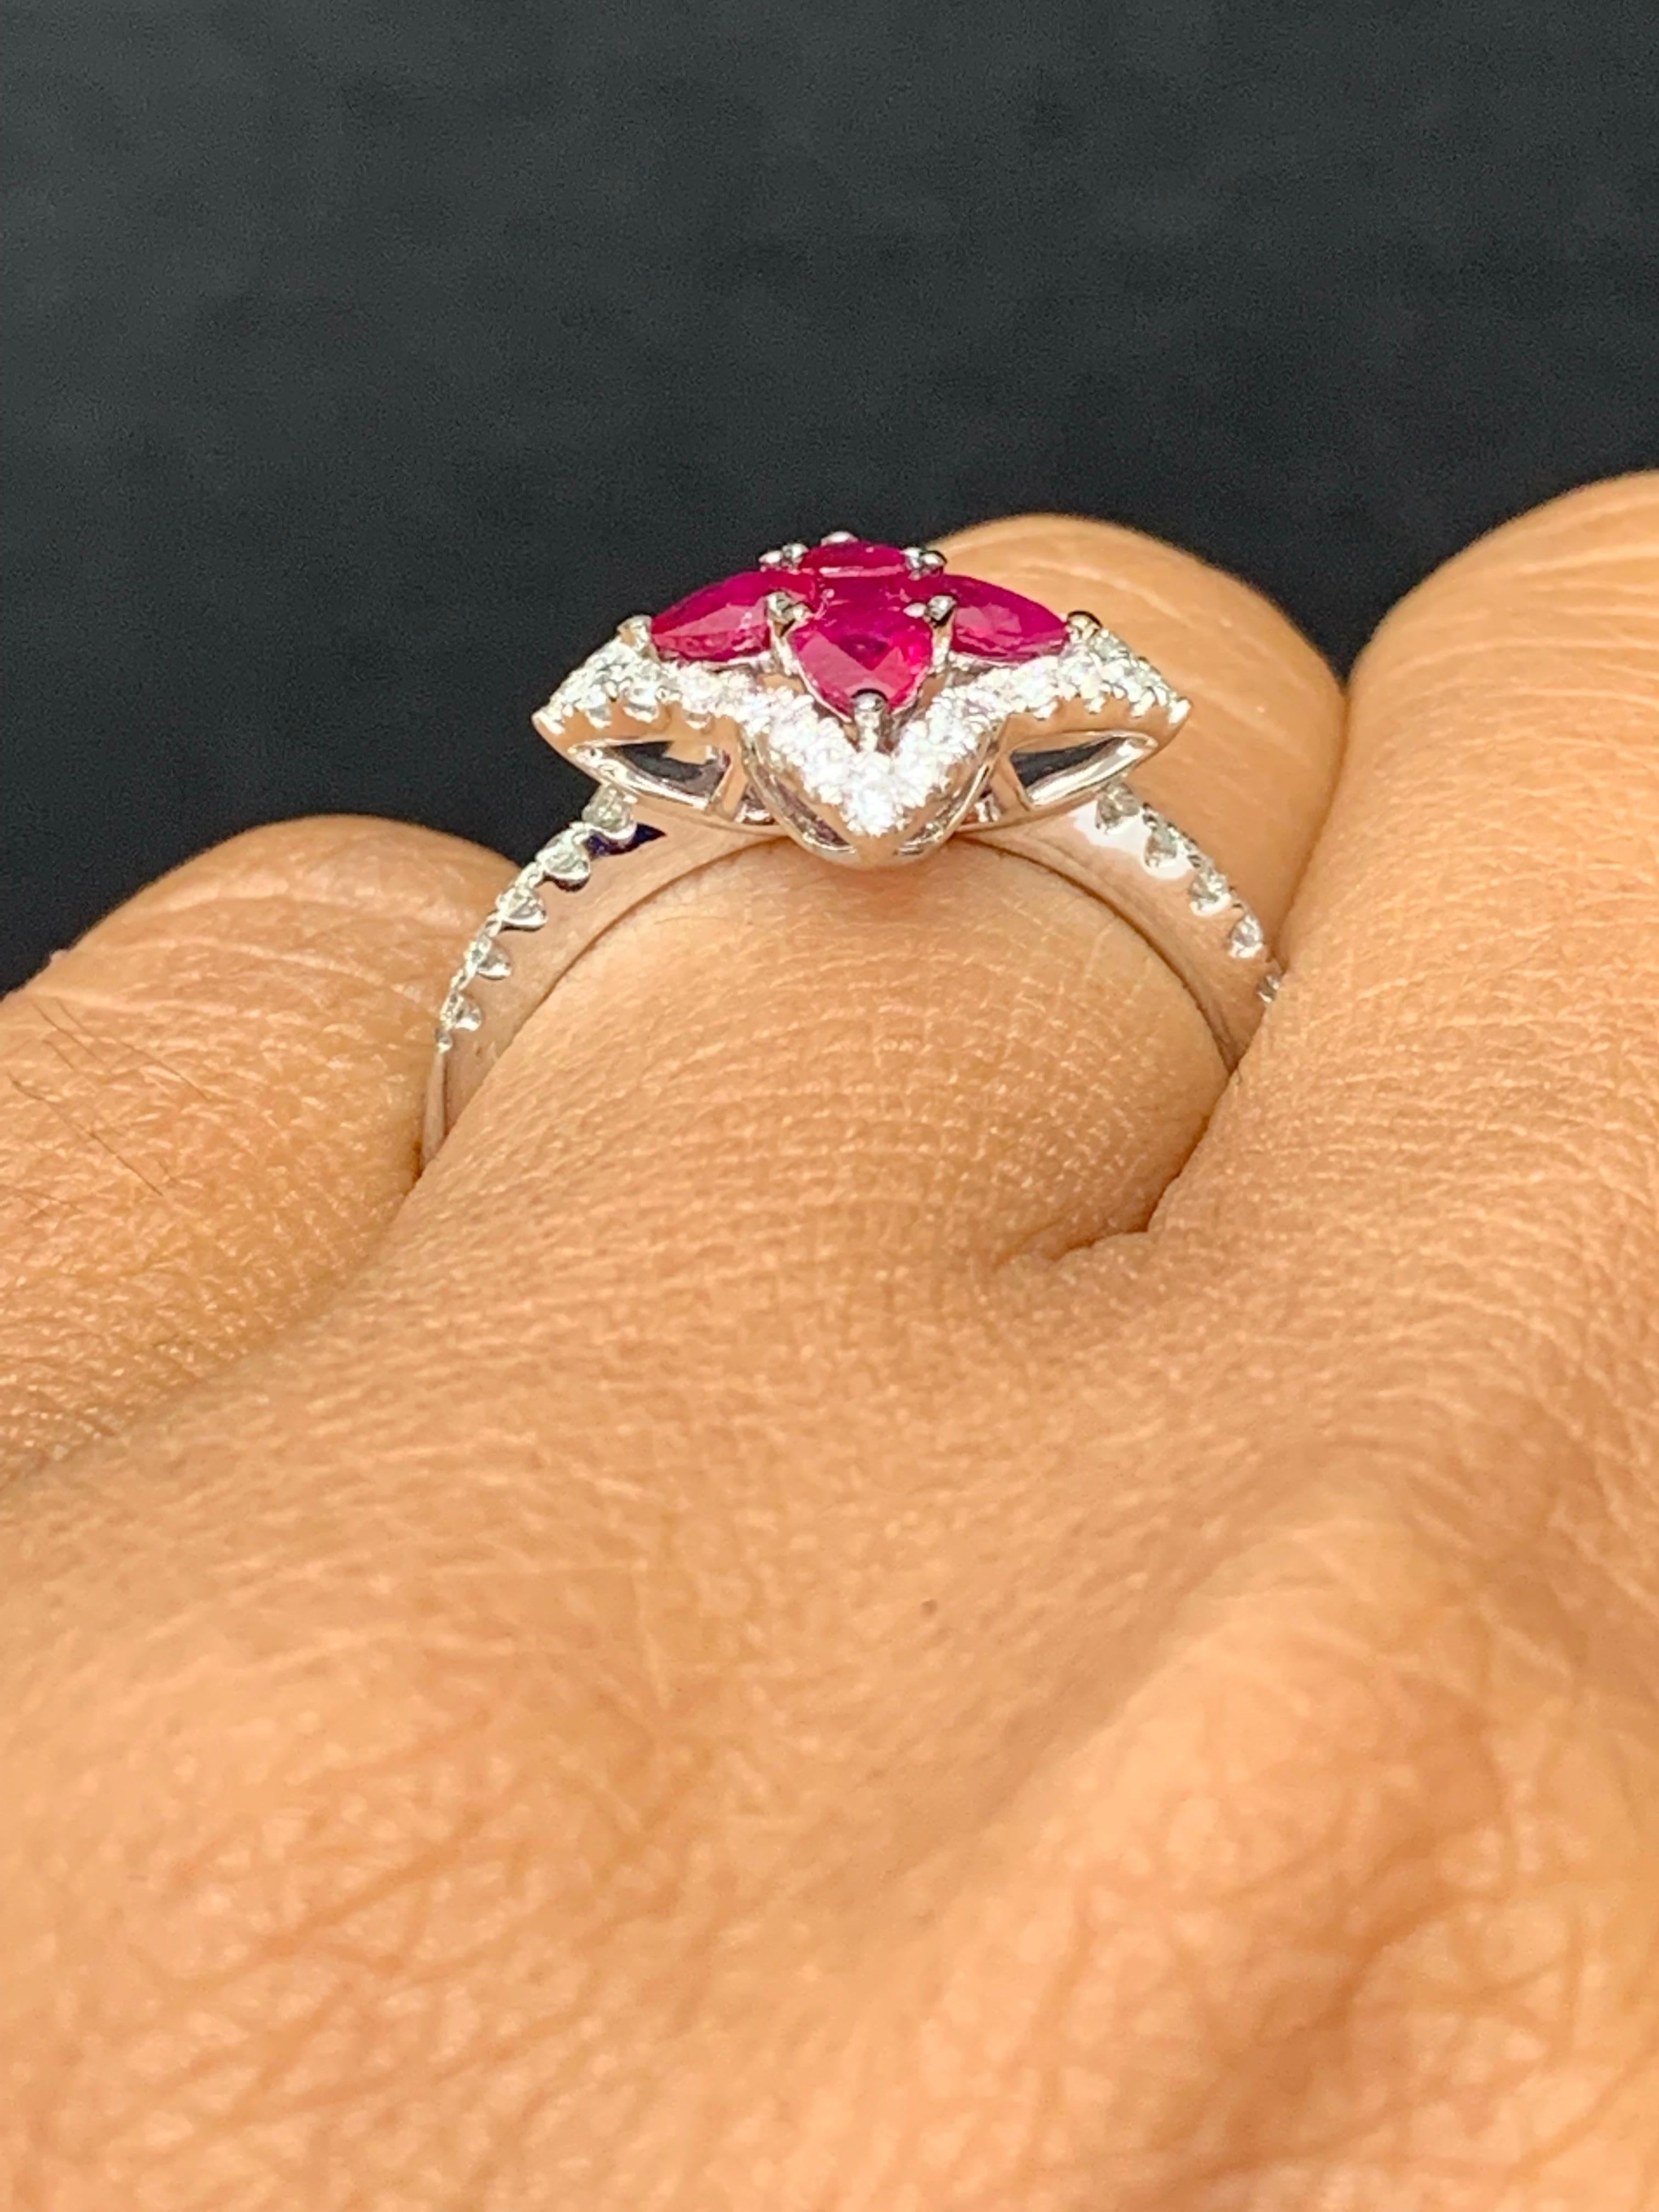 0.70 Carat Pear Shape Ruby and Diamond Cocktail Ring in 18K White Gold For Sale 5